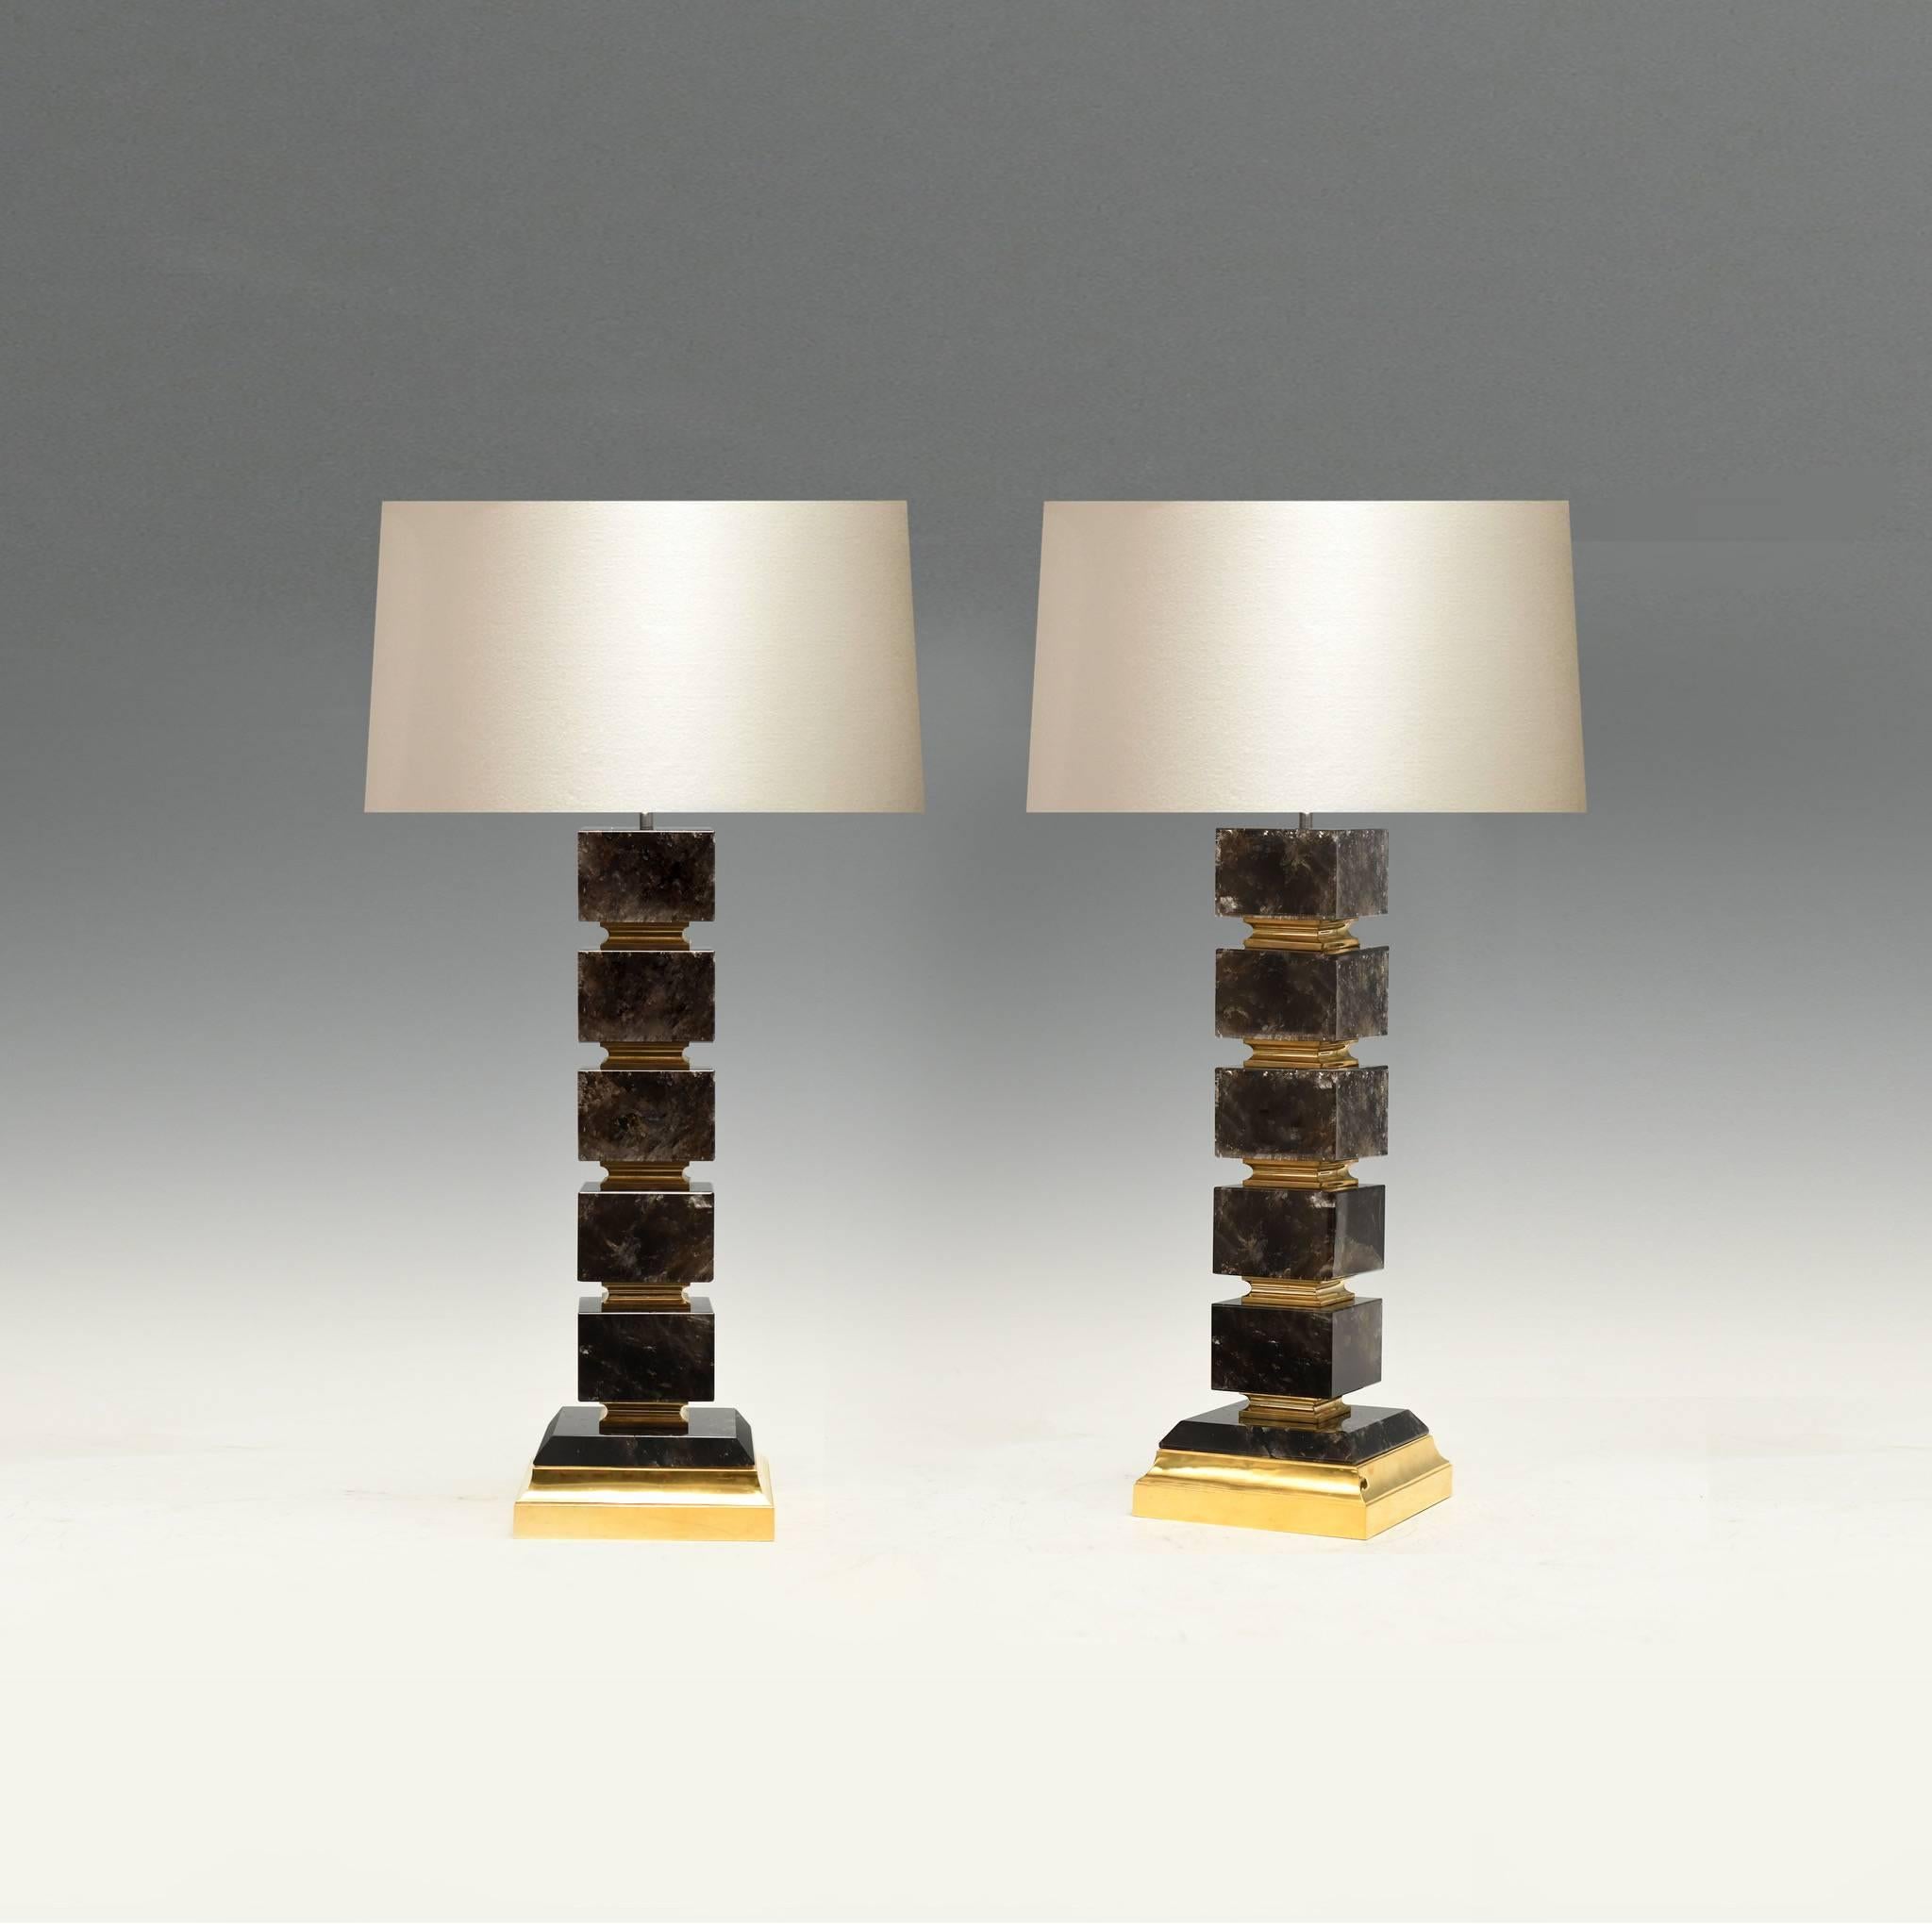 A pair of fine block form dark rock crystal quartz lamp with polish brass insert and base, created by Phoenix Gallery, NYC.
Available in nickel plating and antique brass finished. 
To the rock crystal: 20 inch/H.
(Lampshade not included).
